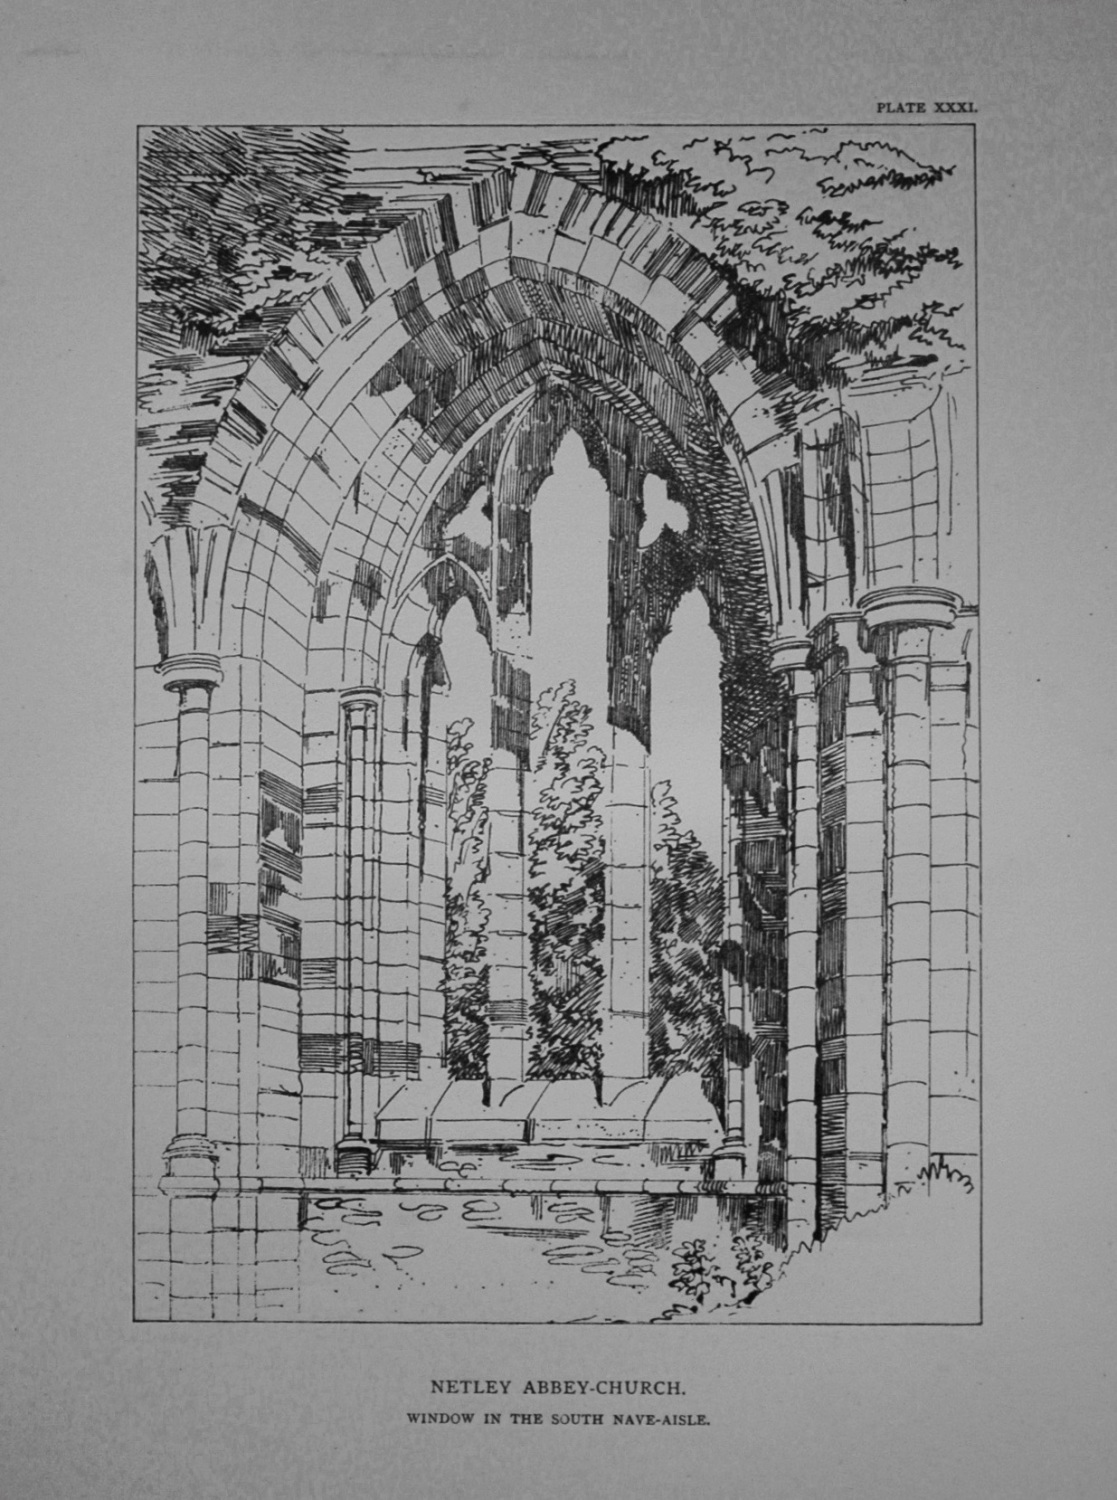 Neatly Abbey-Church. Window in the South Nave-Aisle. 1881.